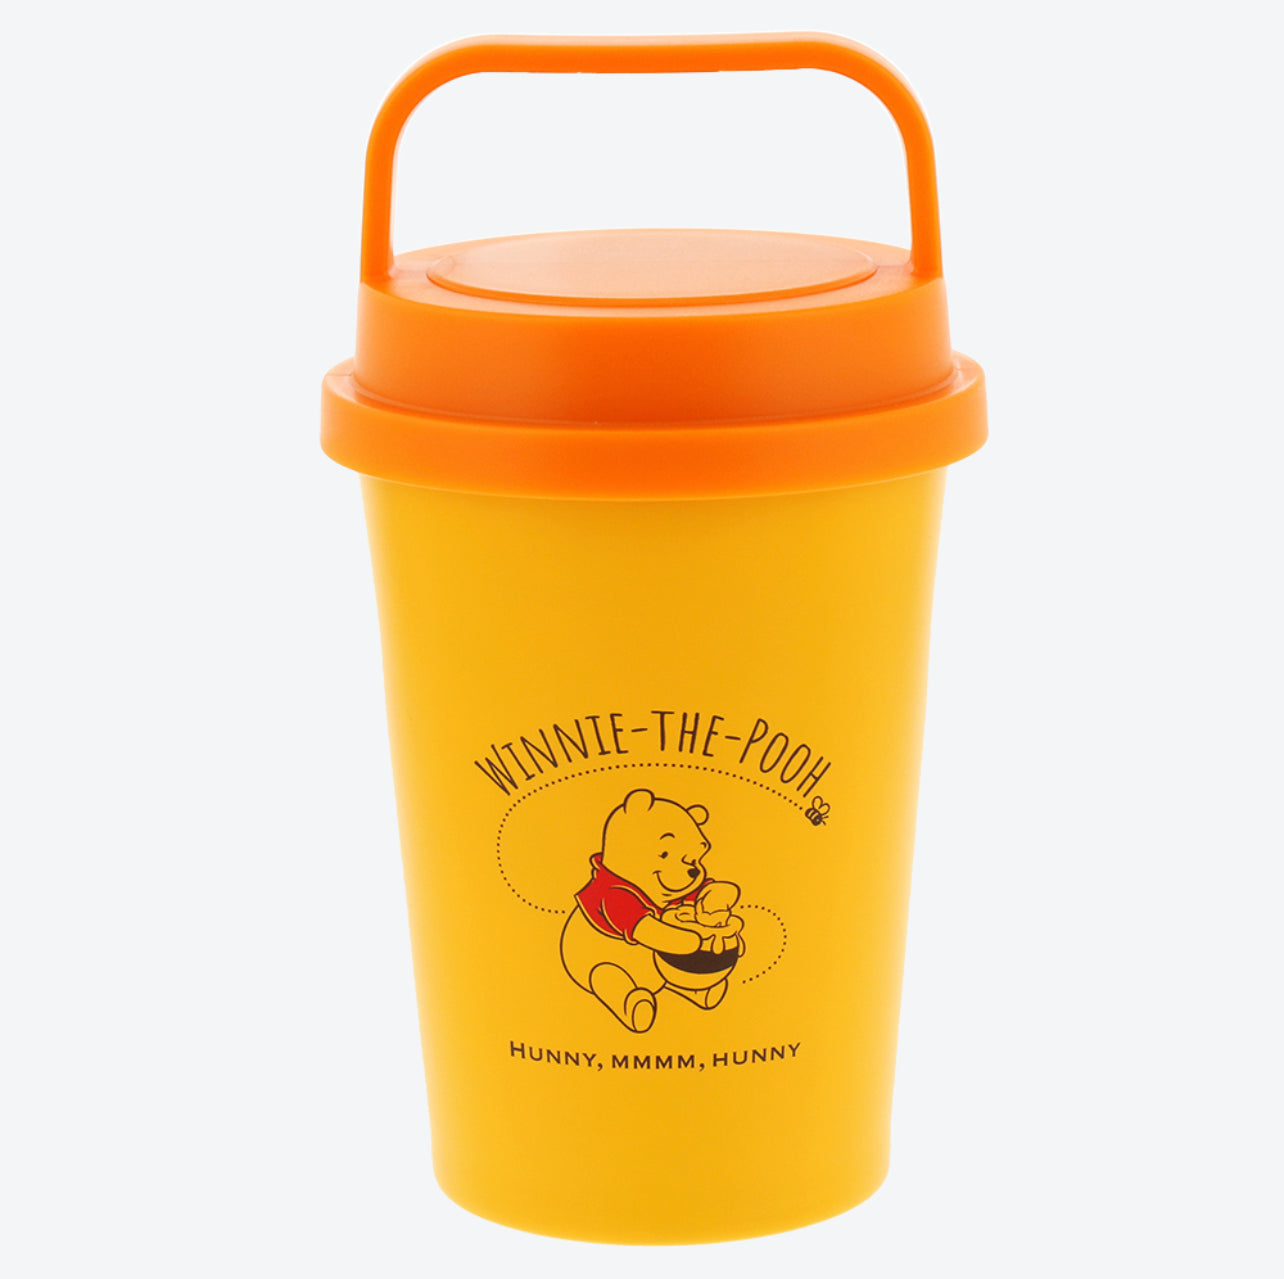 TDR - Winnie the Pooh & Piglet Tumbler with Handle (Release Date: Sept 21)